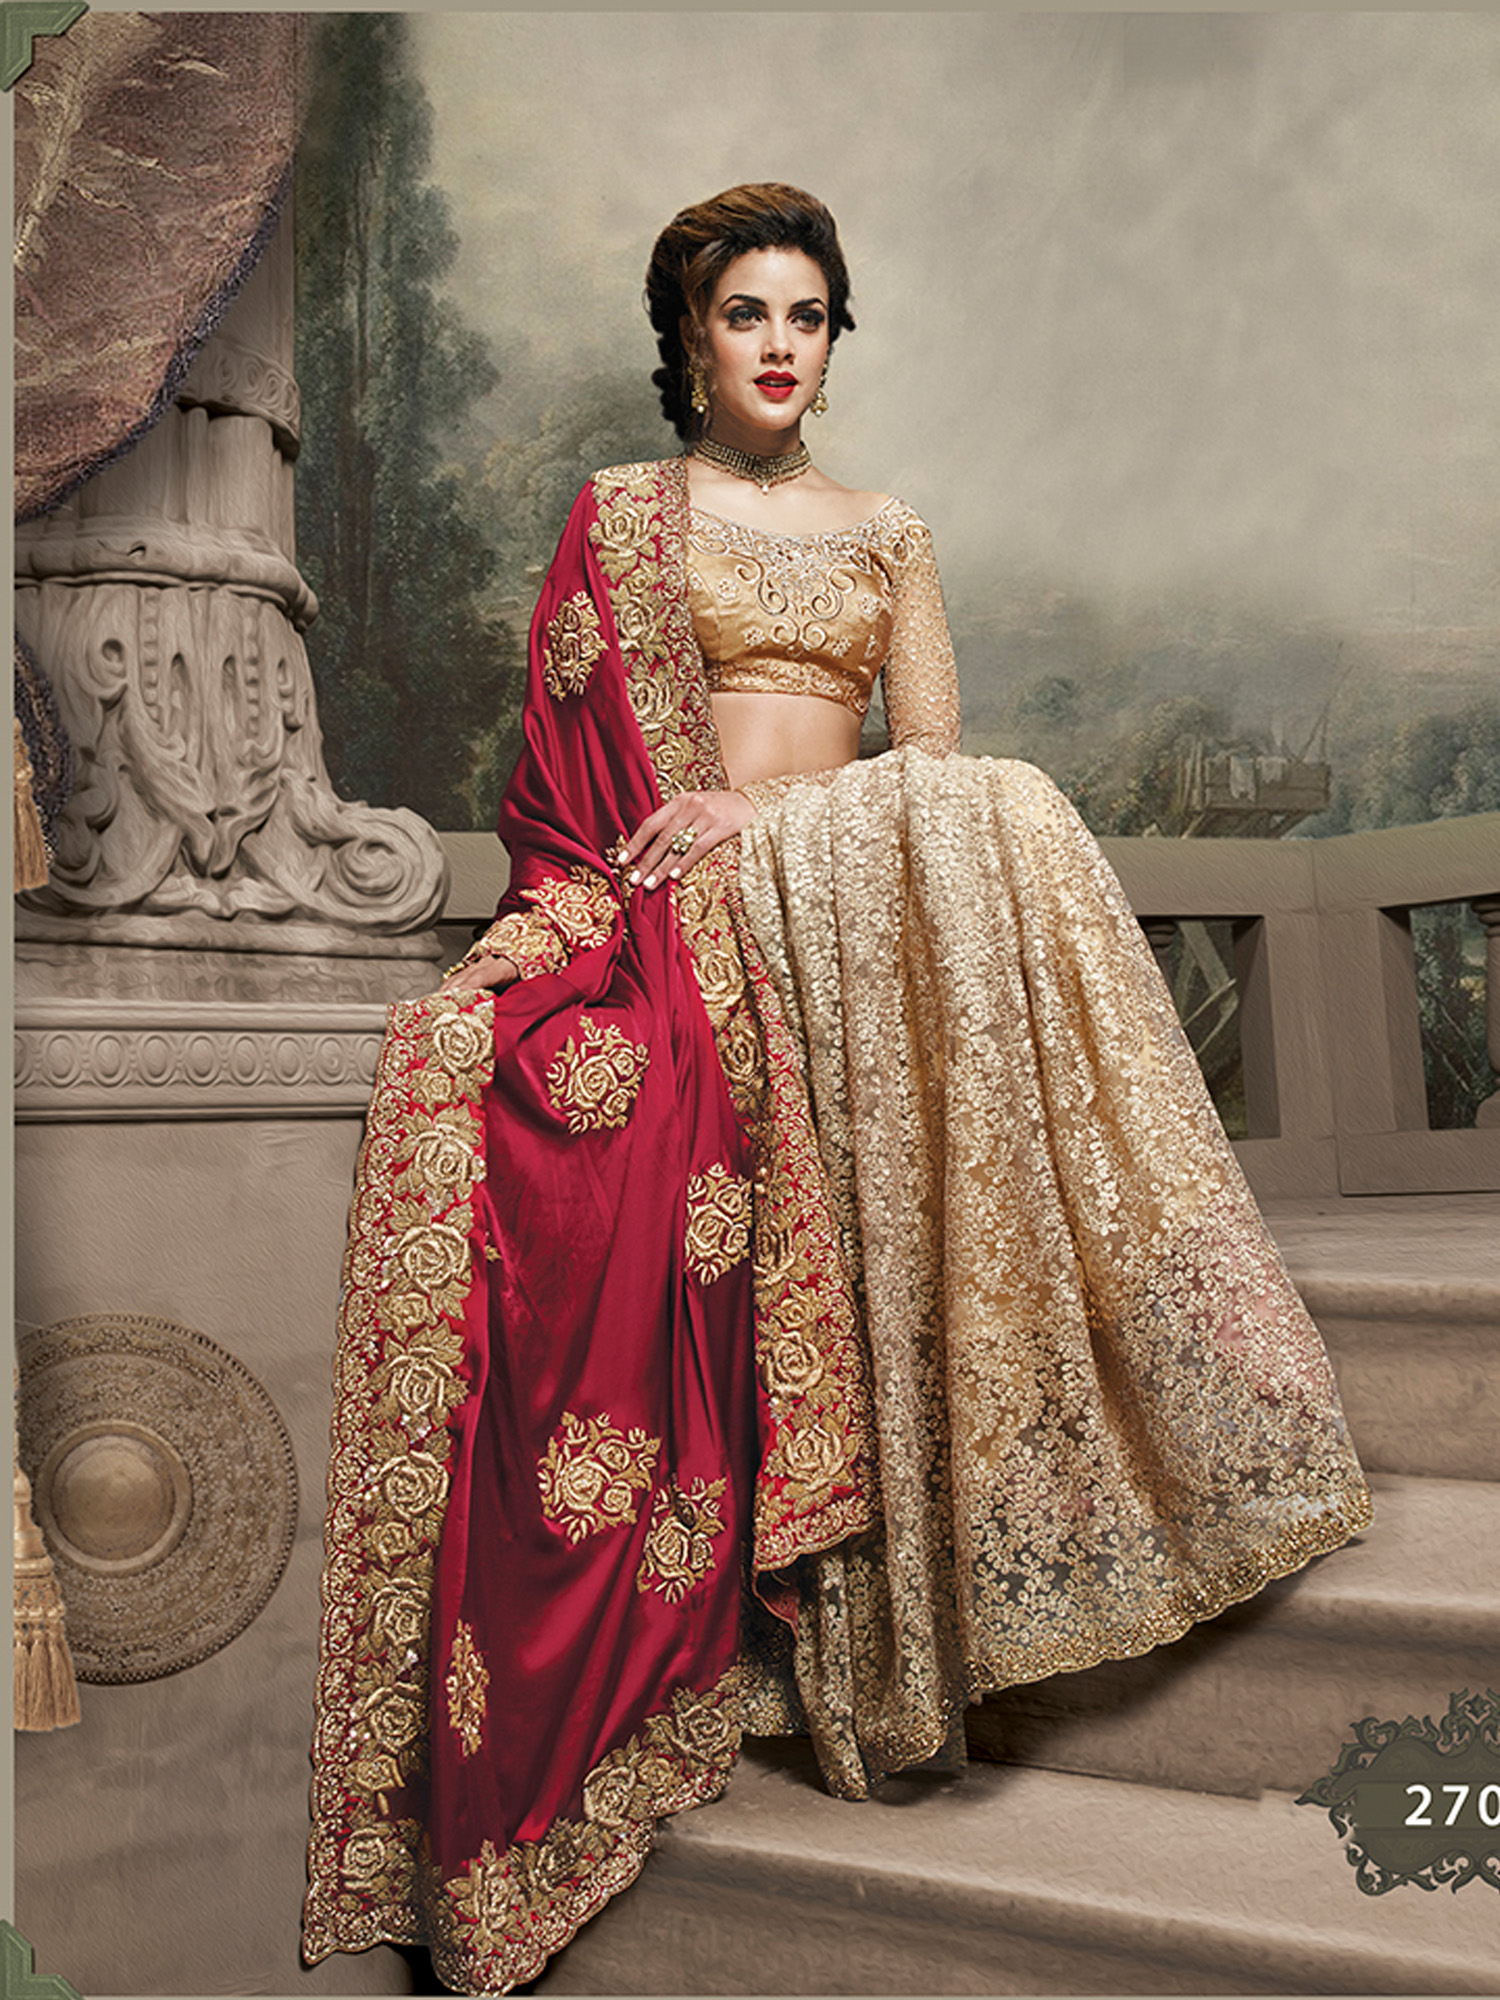 Online Cream Maroon Embroidery Party Wear Saree Prices - Shopclues India